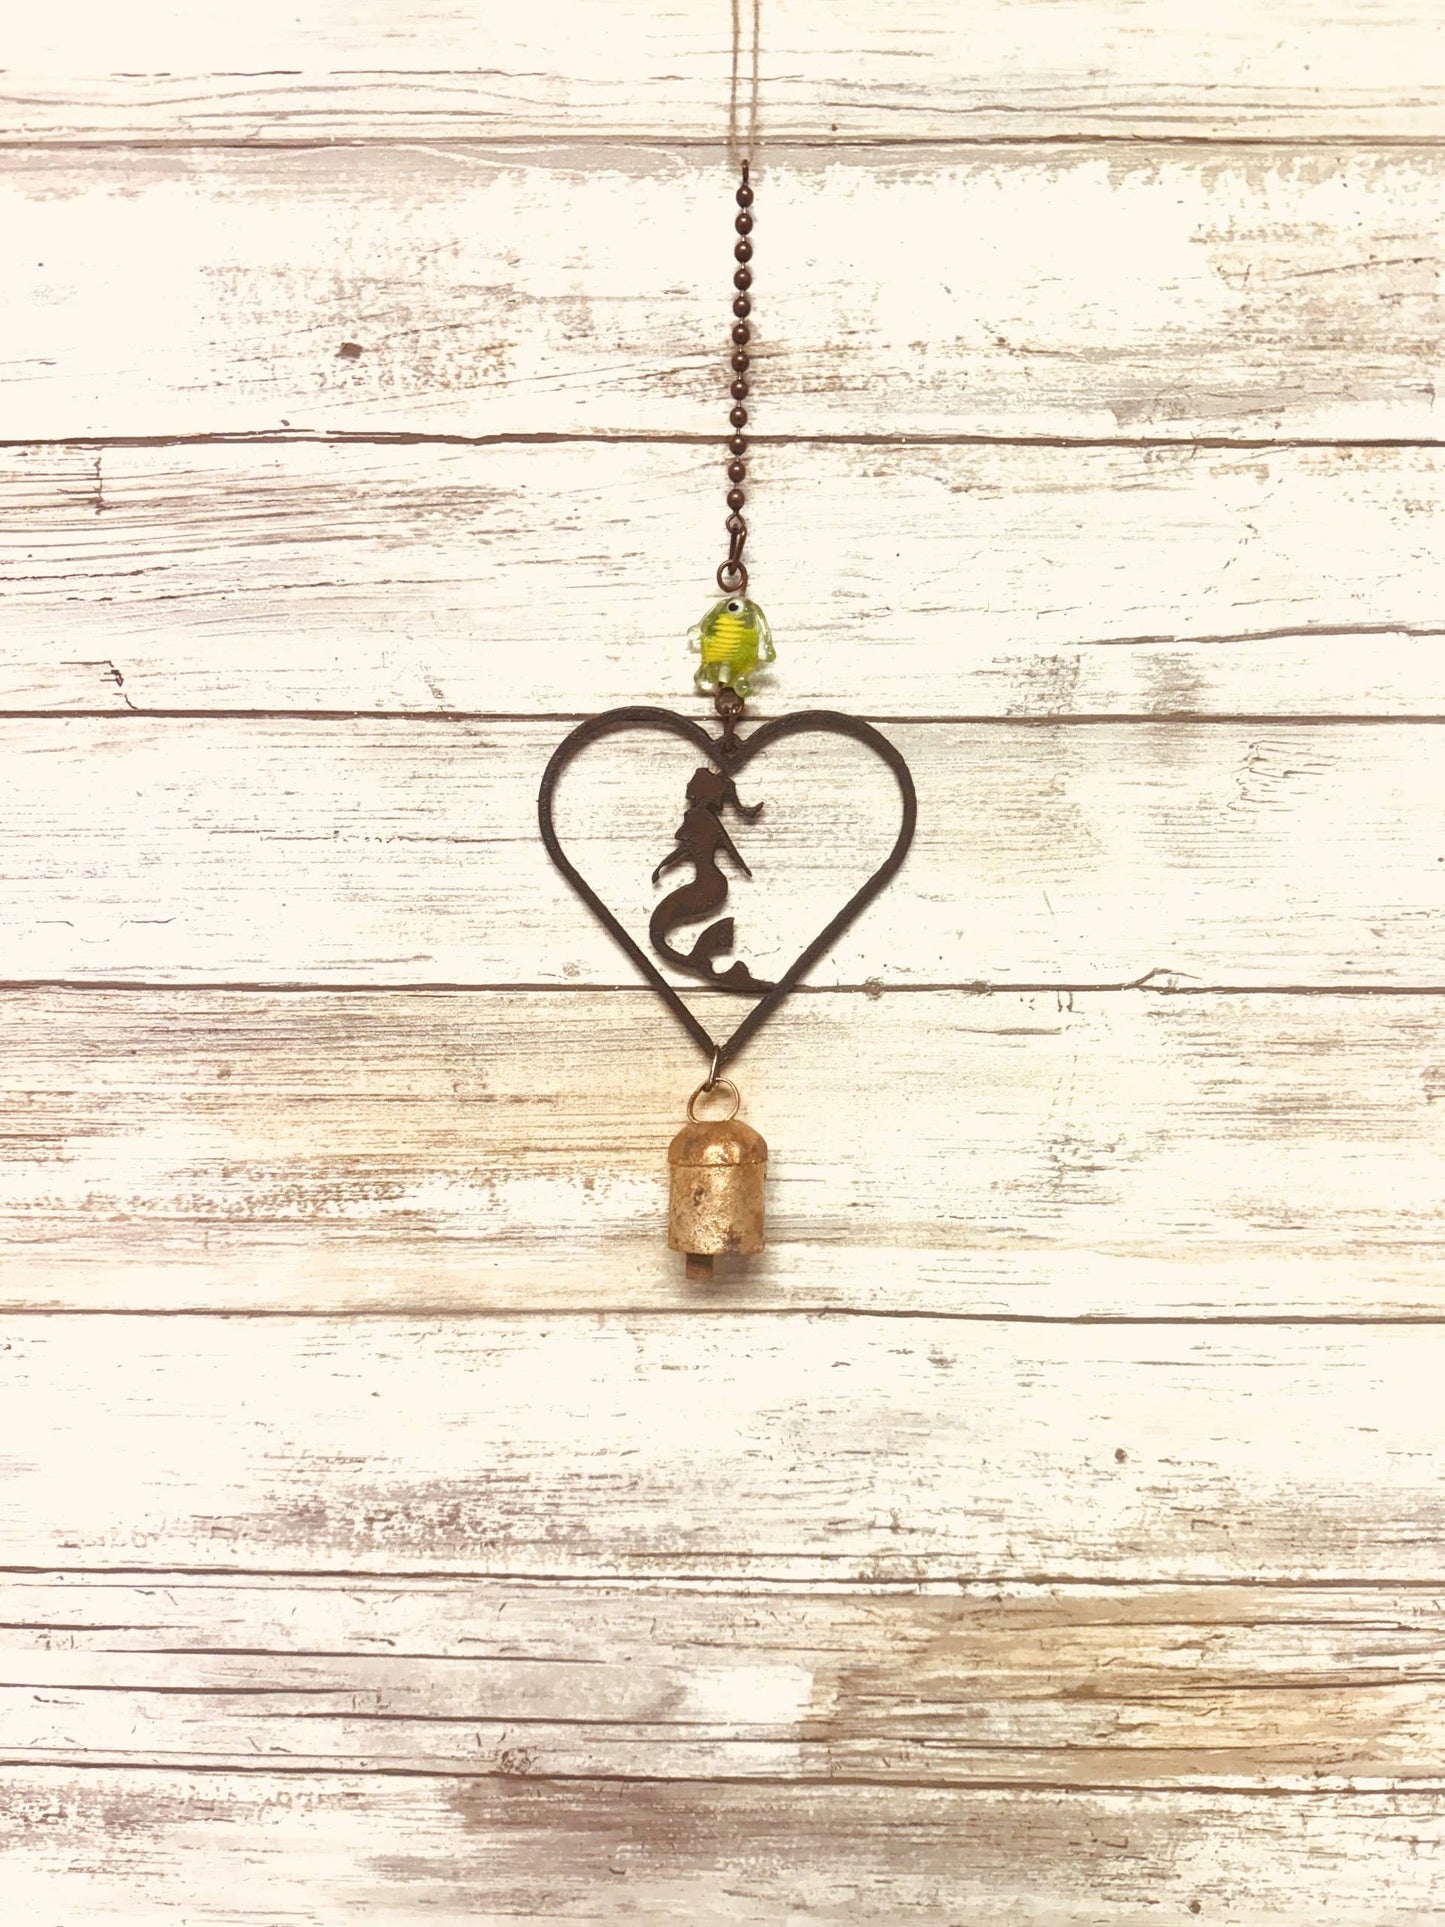 Heart Outline with Mermaid Nautical Rustic Garden Chime Bell